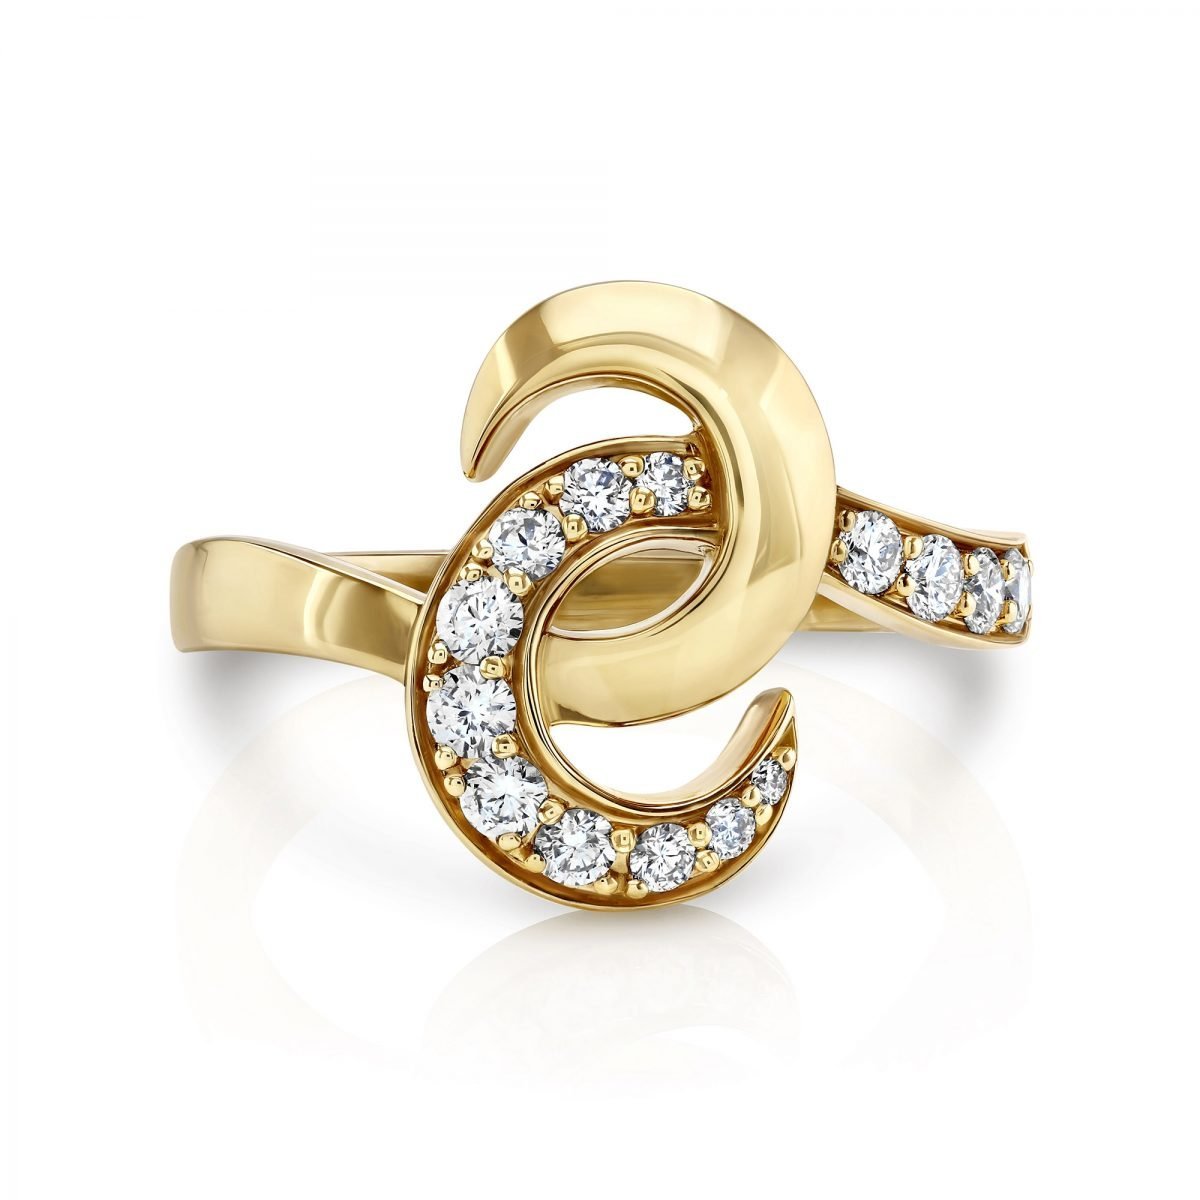 Hooked On You Yellow Gold Diamond Ring